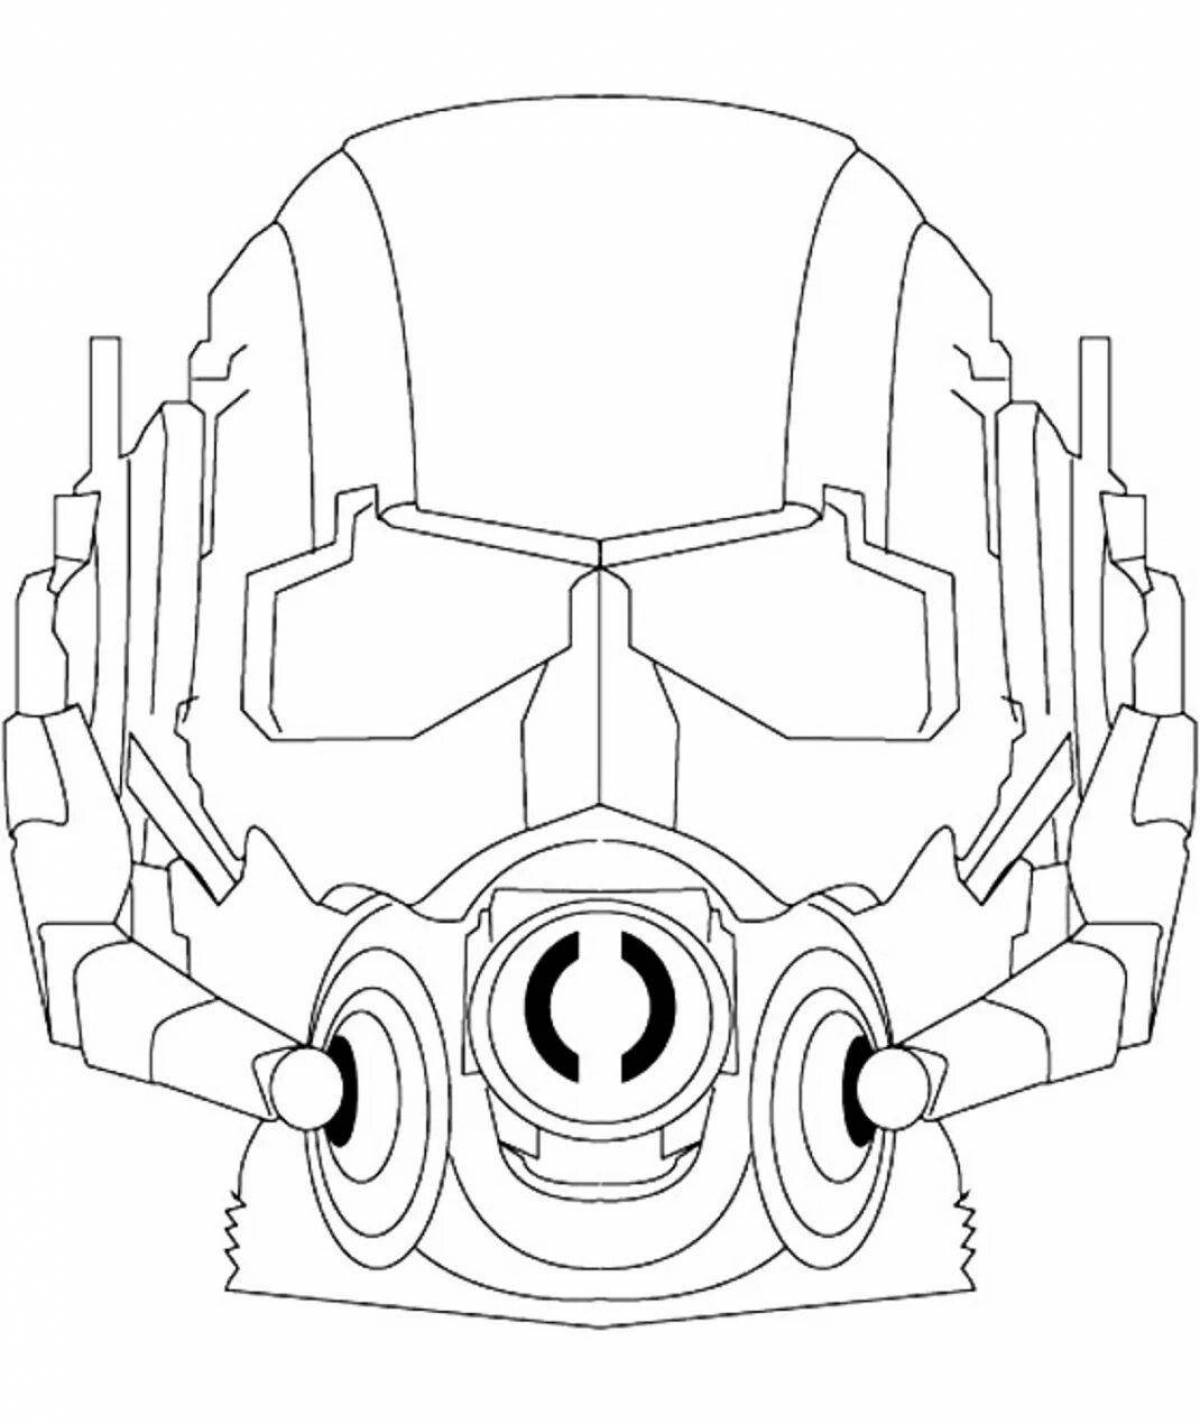 Iron man living mask coloring page